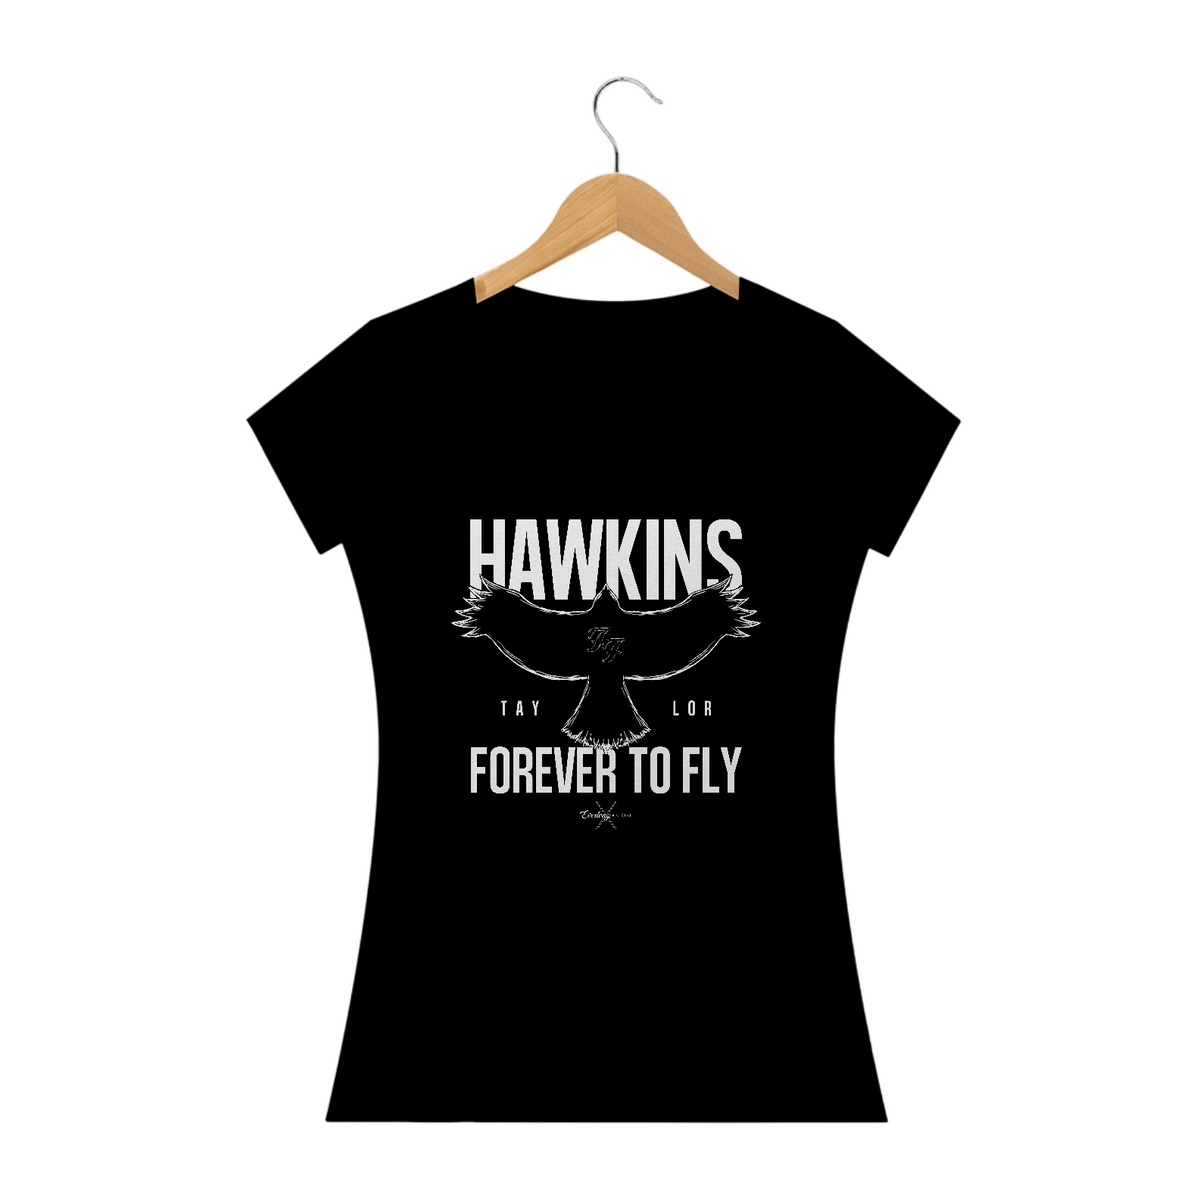 Nome do produto: Hawkings Forever to Fly